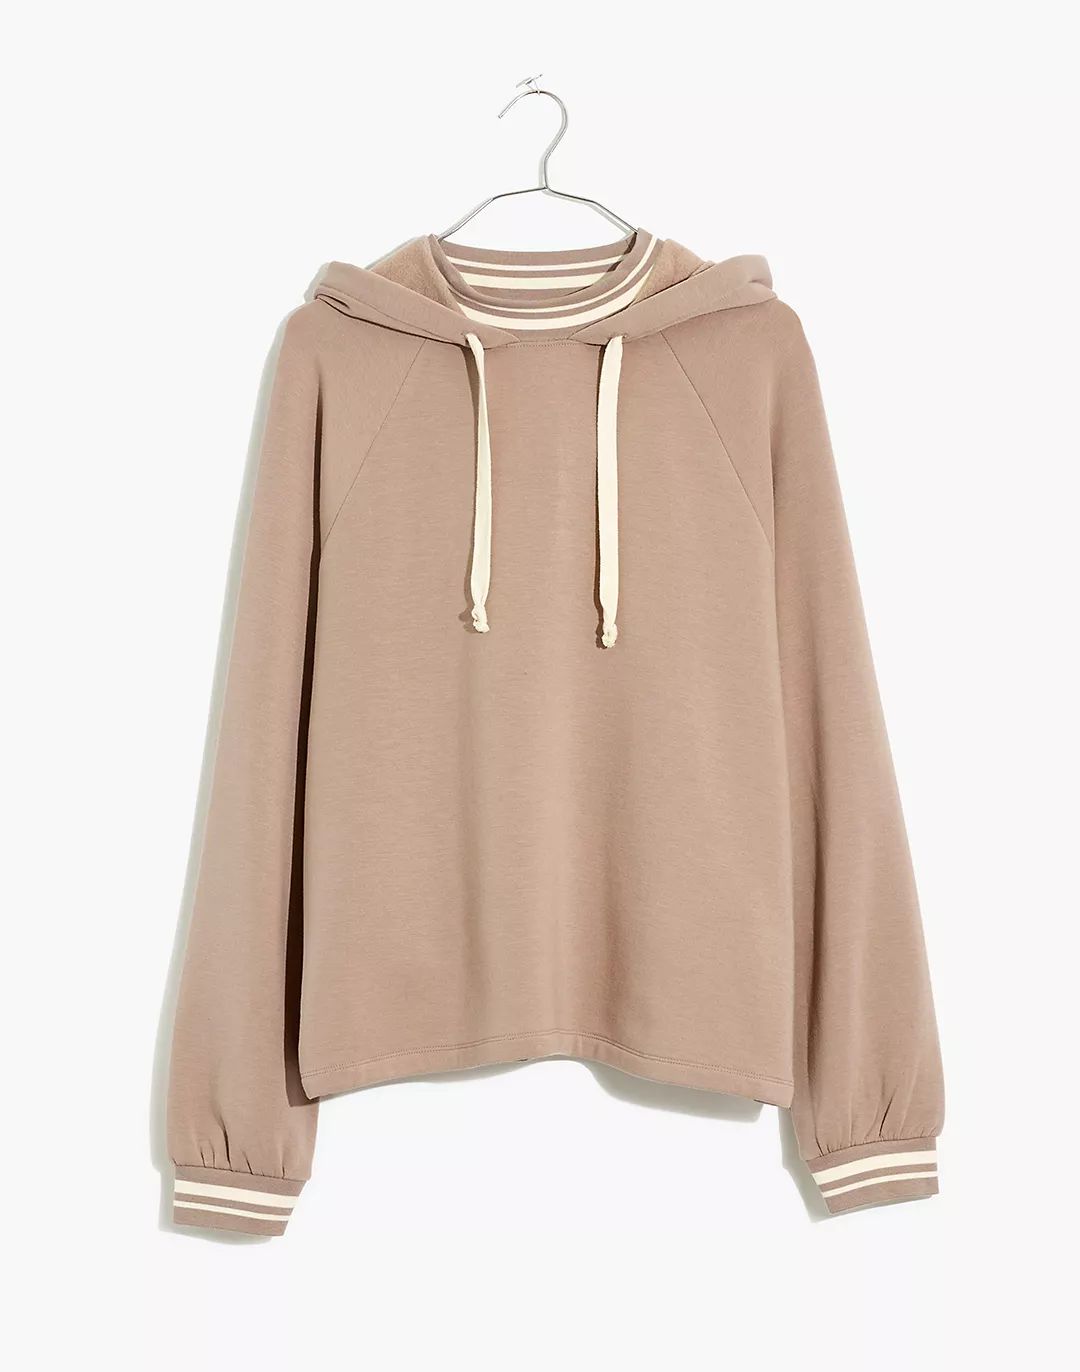 MWL Superbrushed Easygoing Hoodie Sweatshirt: Striped-Trim Edition | Madewell